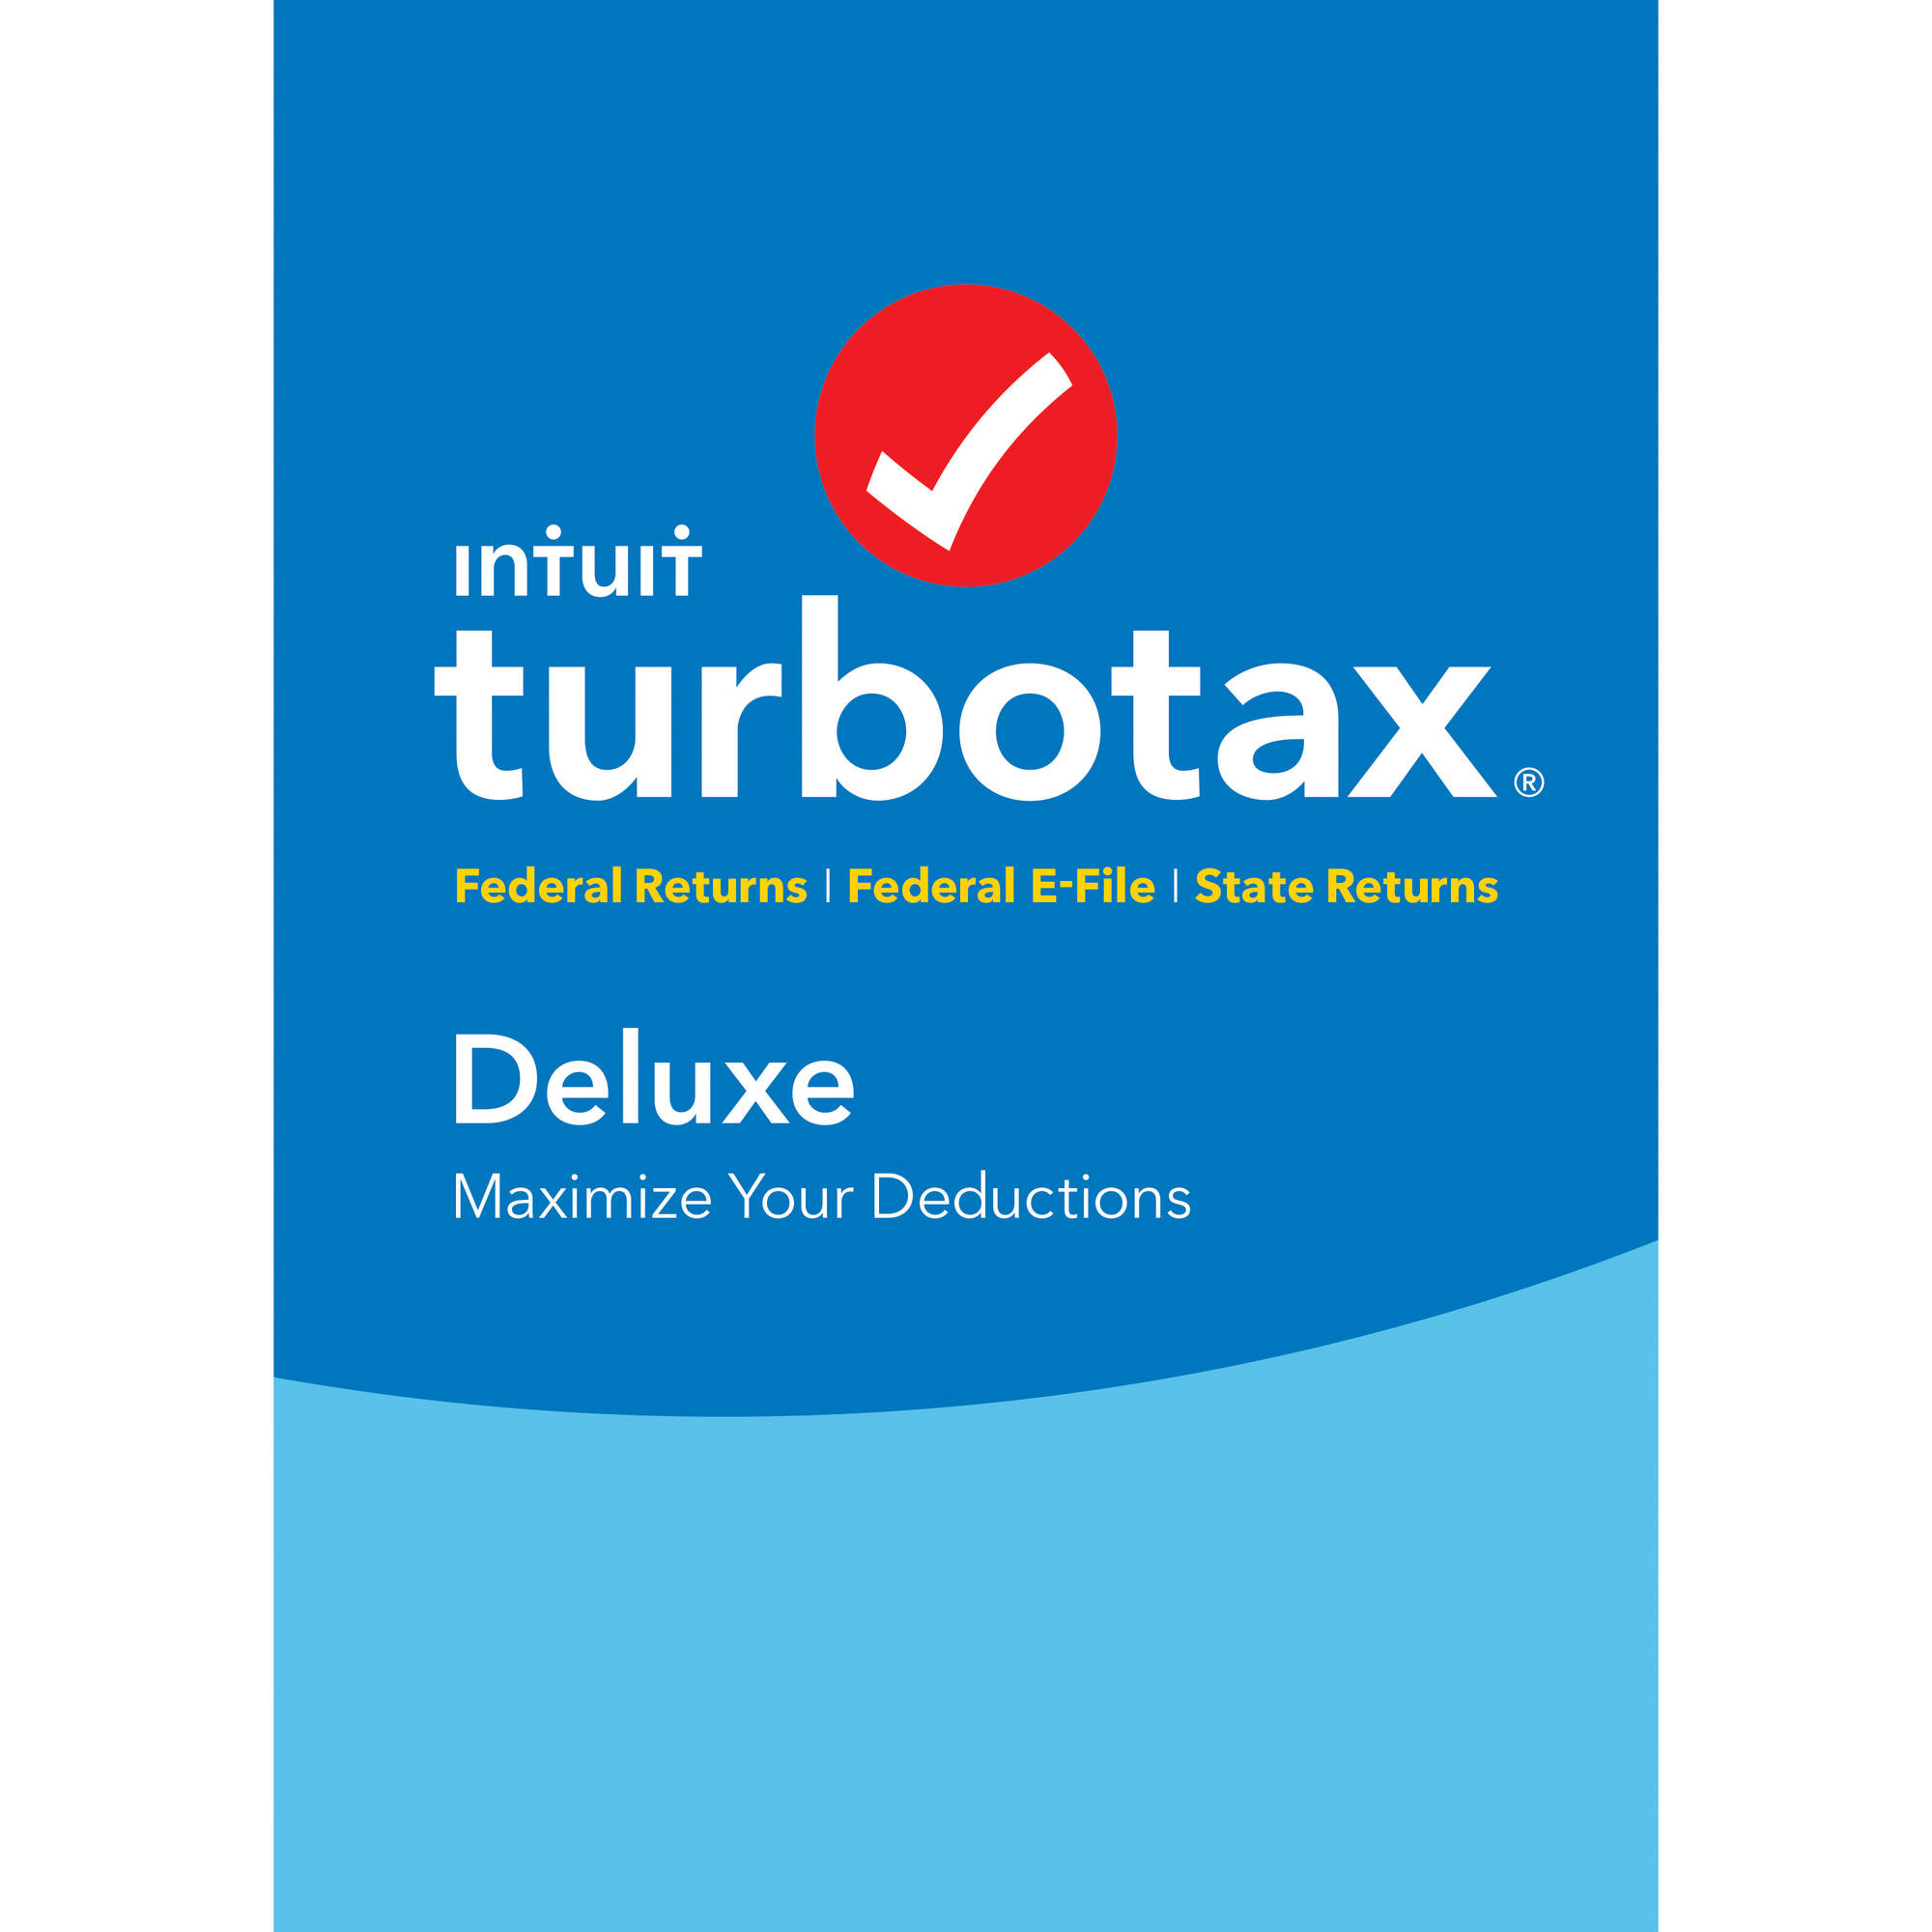 TurboTax Deluxe (Federal and State) for Windows, Tax Year 2016 (Email Delivery) - image 1 of 1